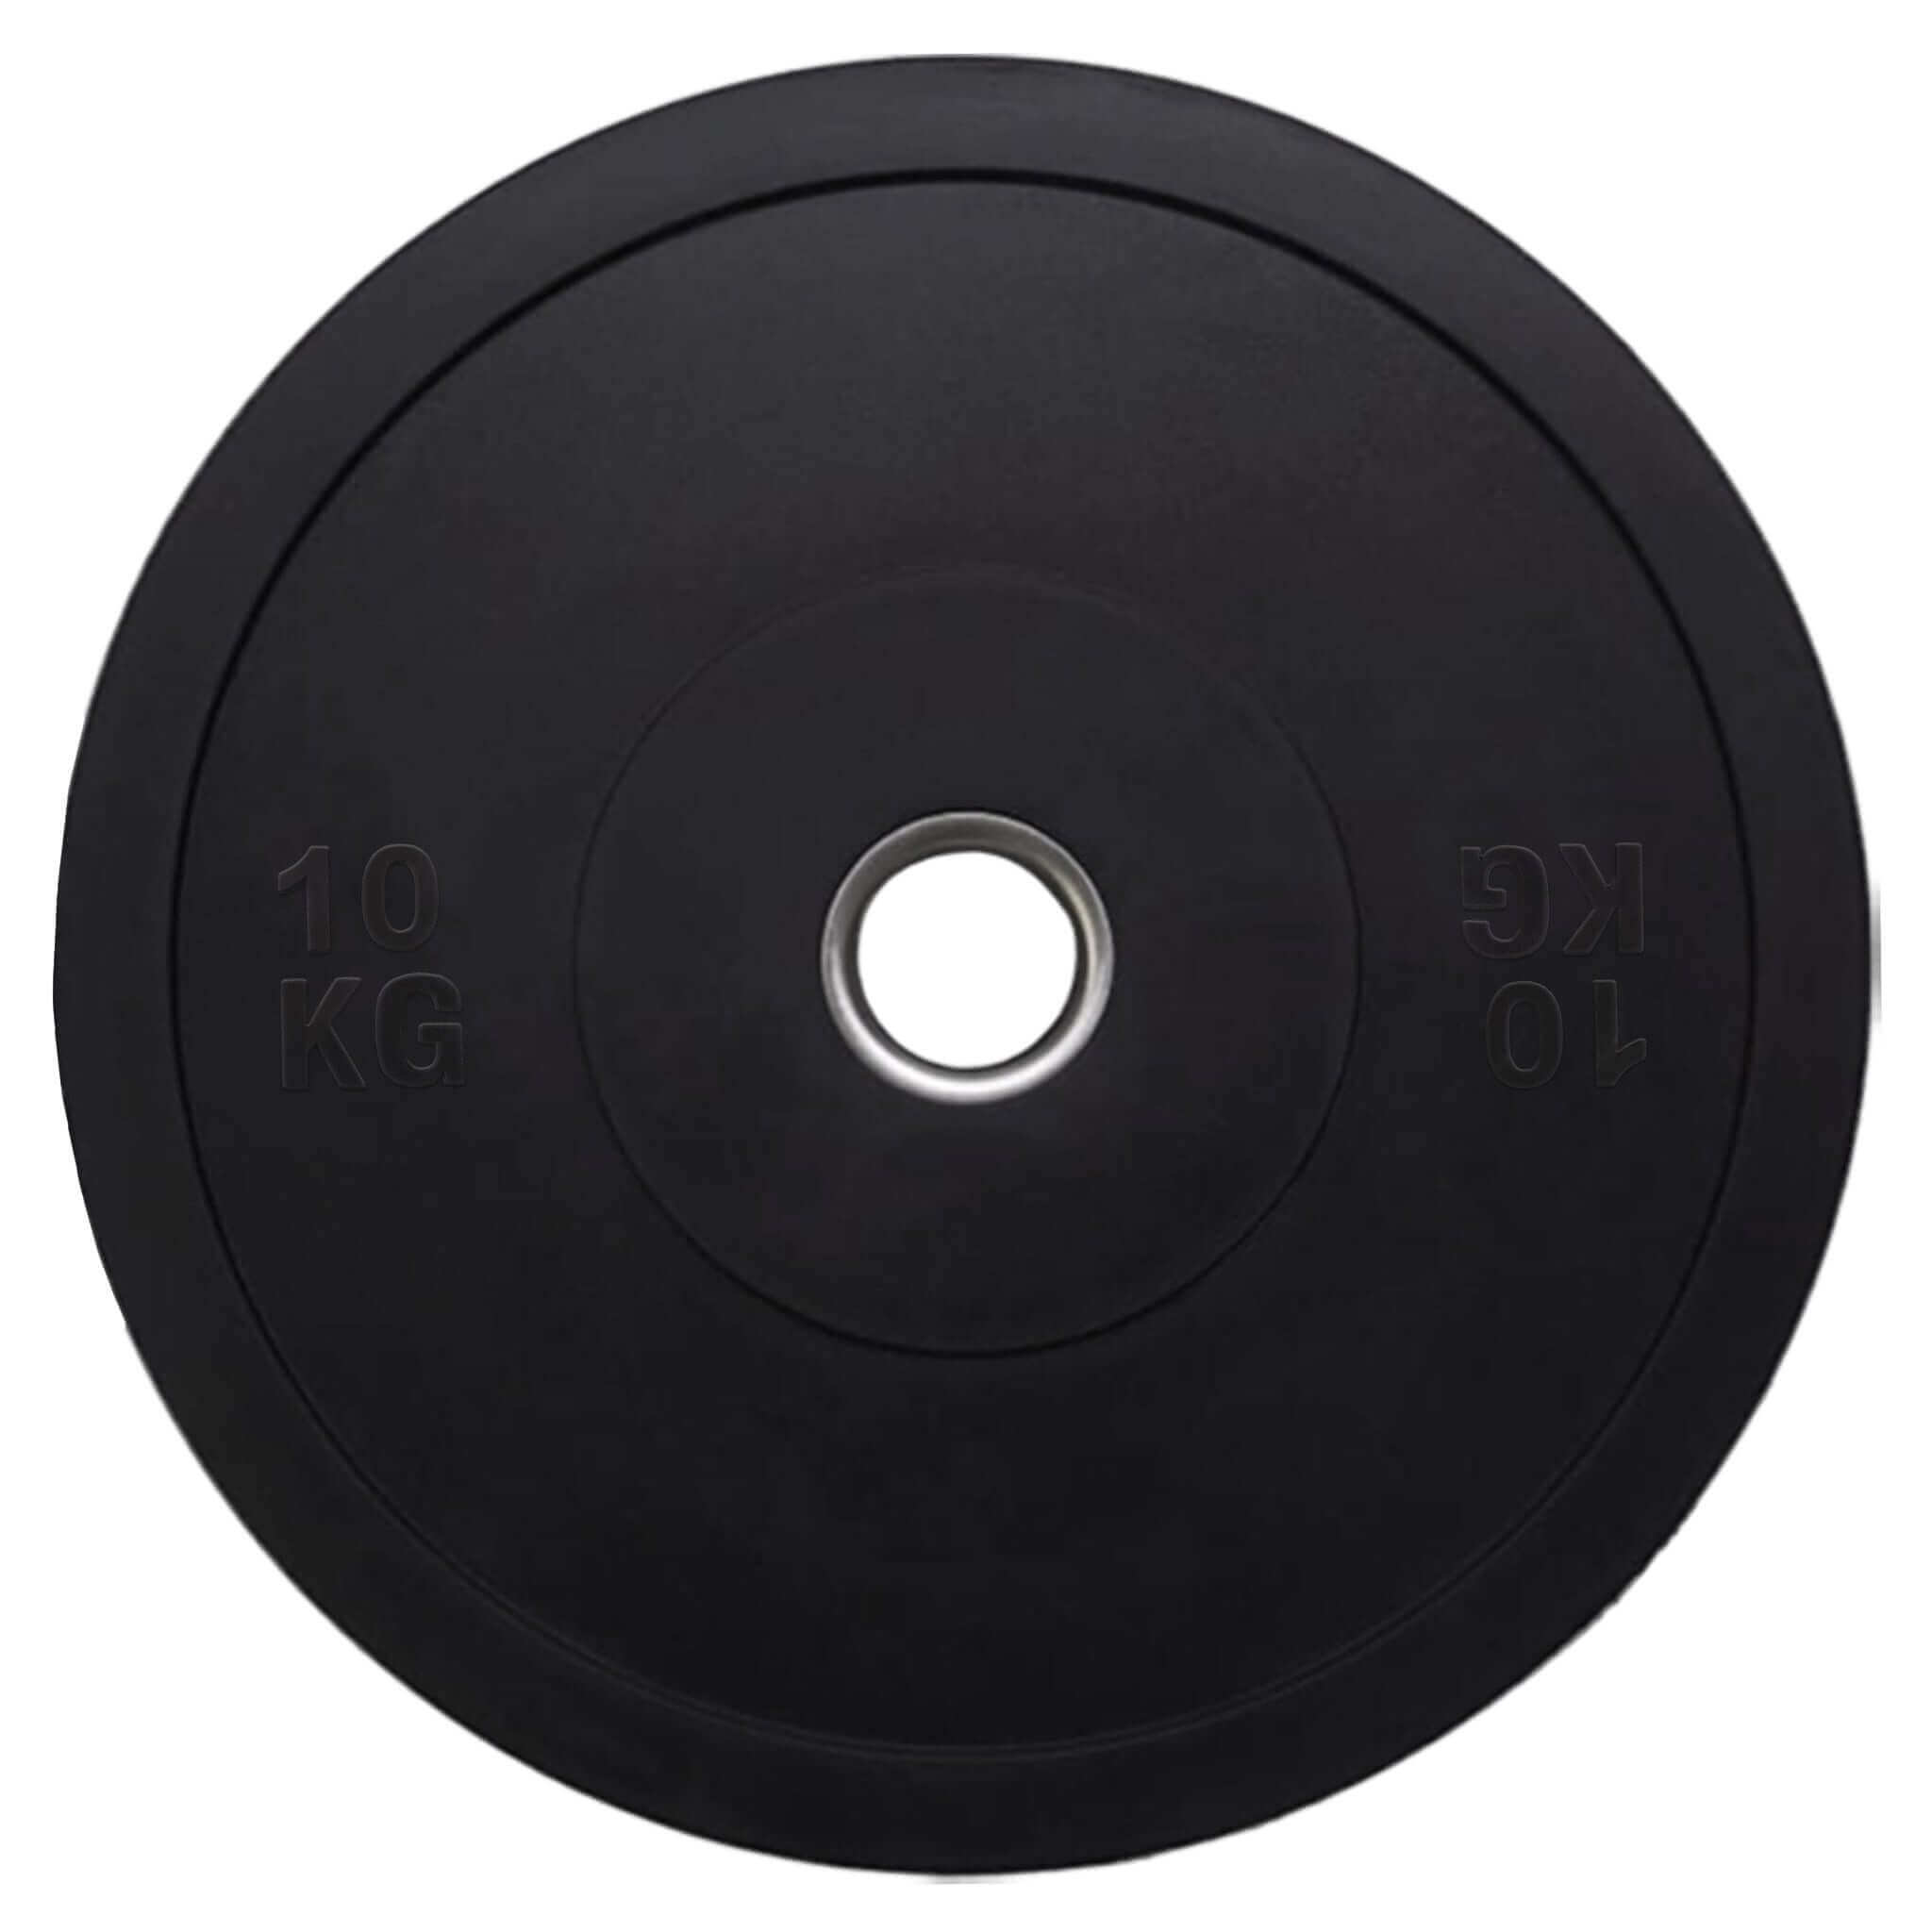 25kg Bumper Plate Black Rubber Weight Plates Pair | INSOURCE